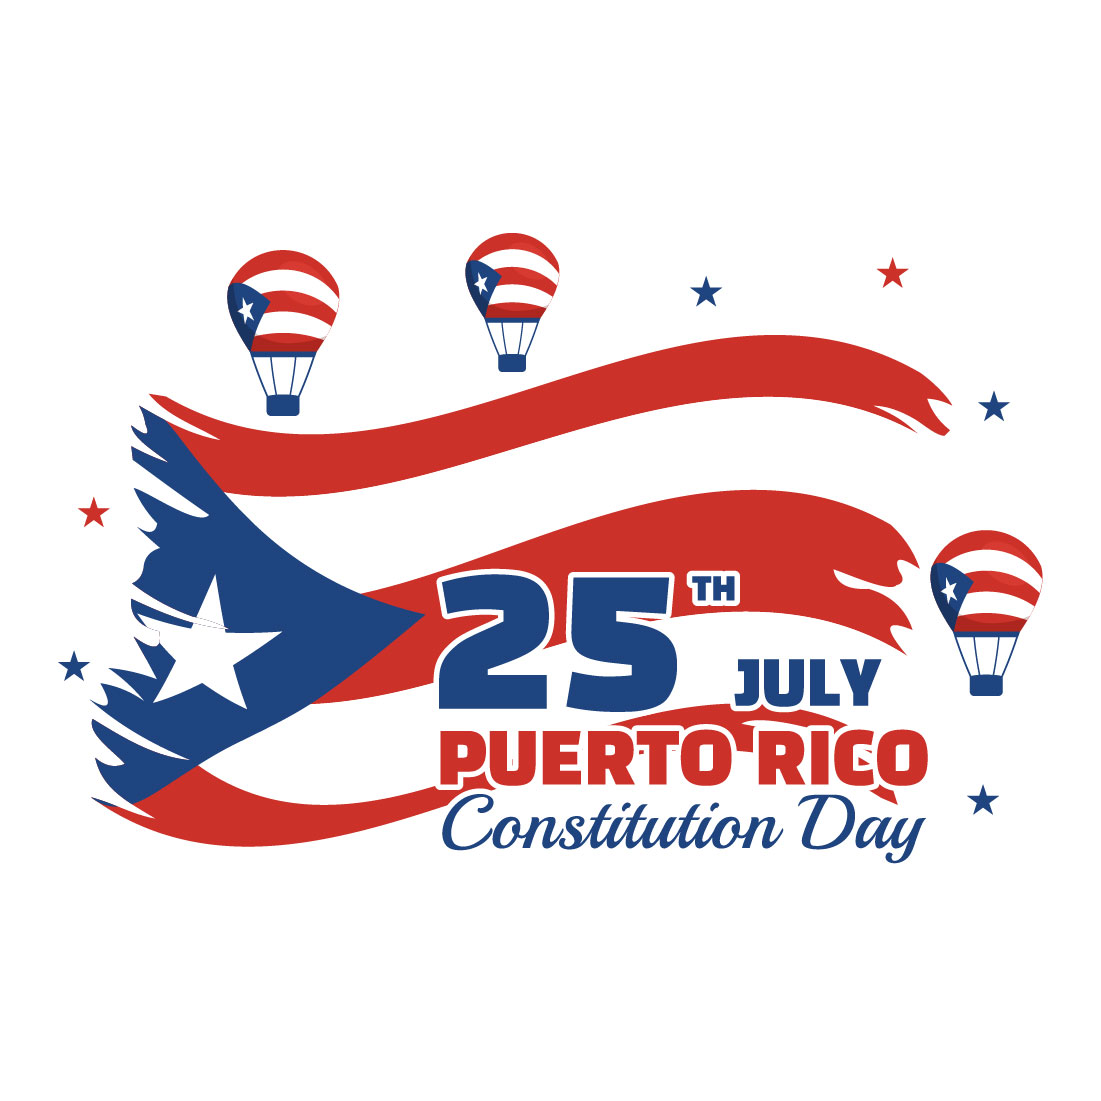 12 Happy Puerto Rico Constitution Day Illustration preview image.